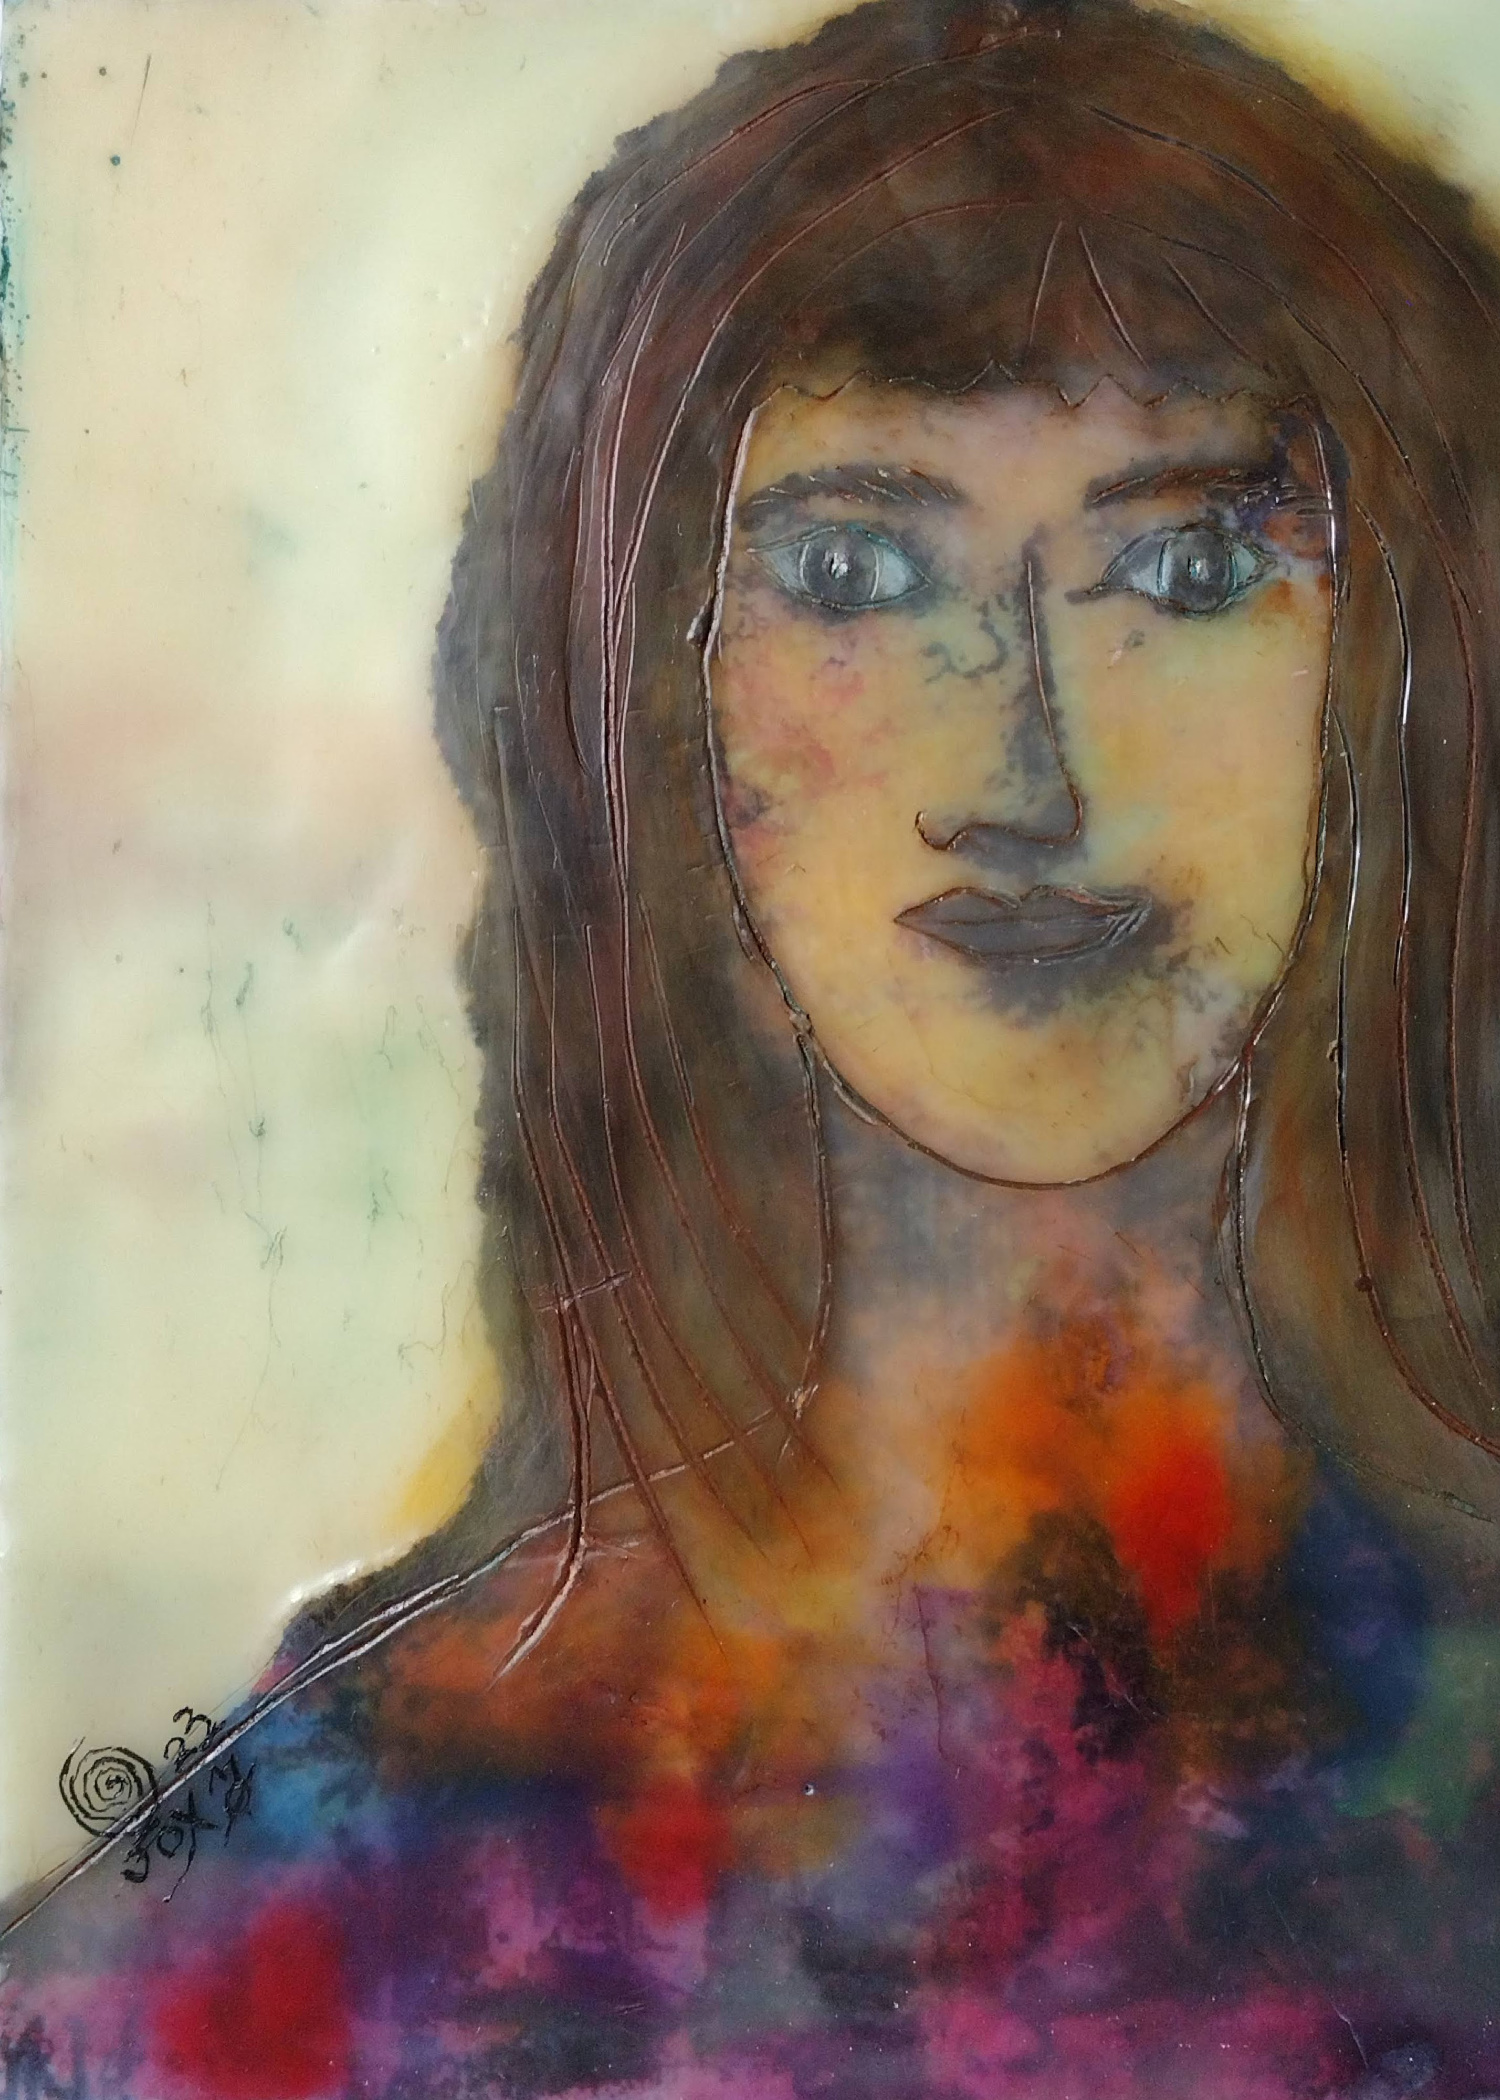 encaustic mixed-media painting of a person's face with brown hair and